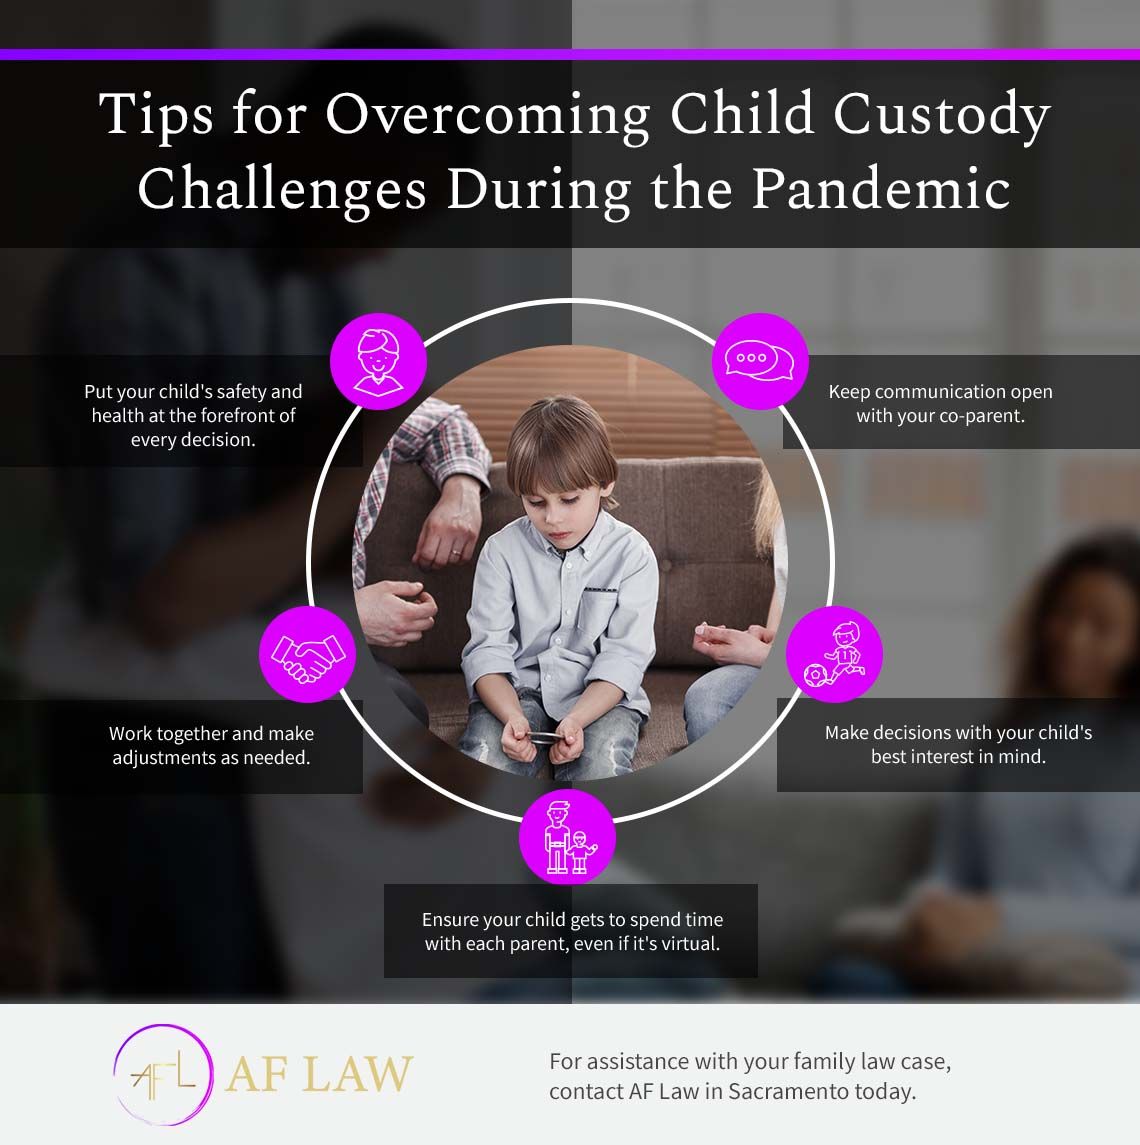 Tips for Overcoming Child Custody Challenges During the Pandemic.jpg